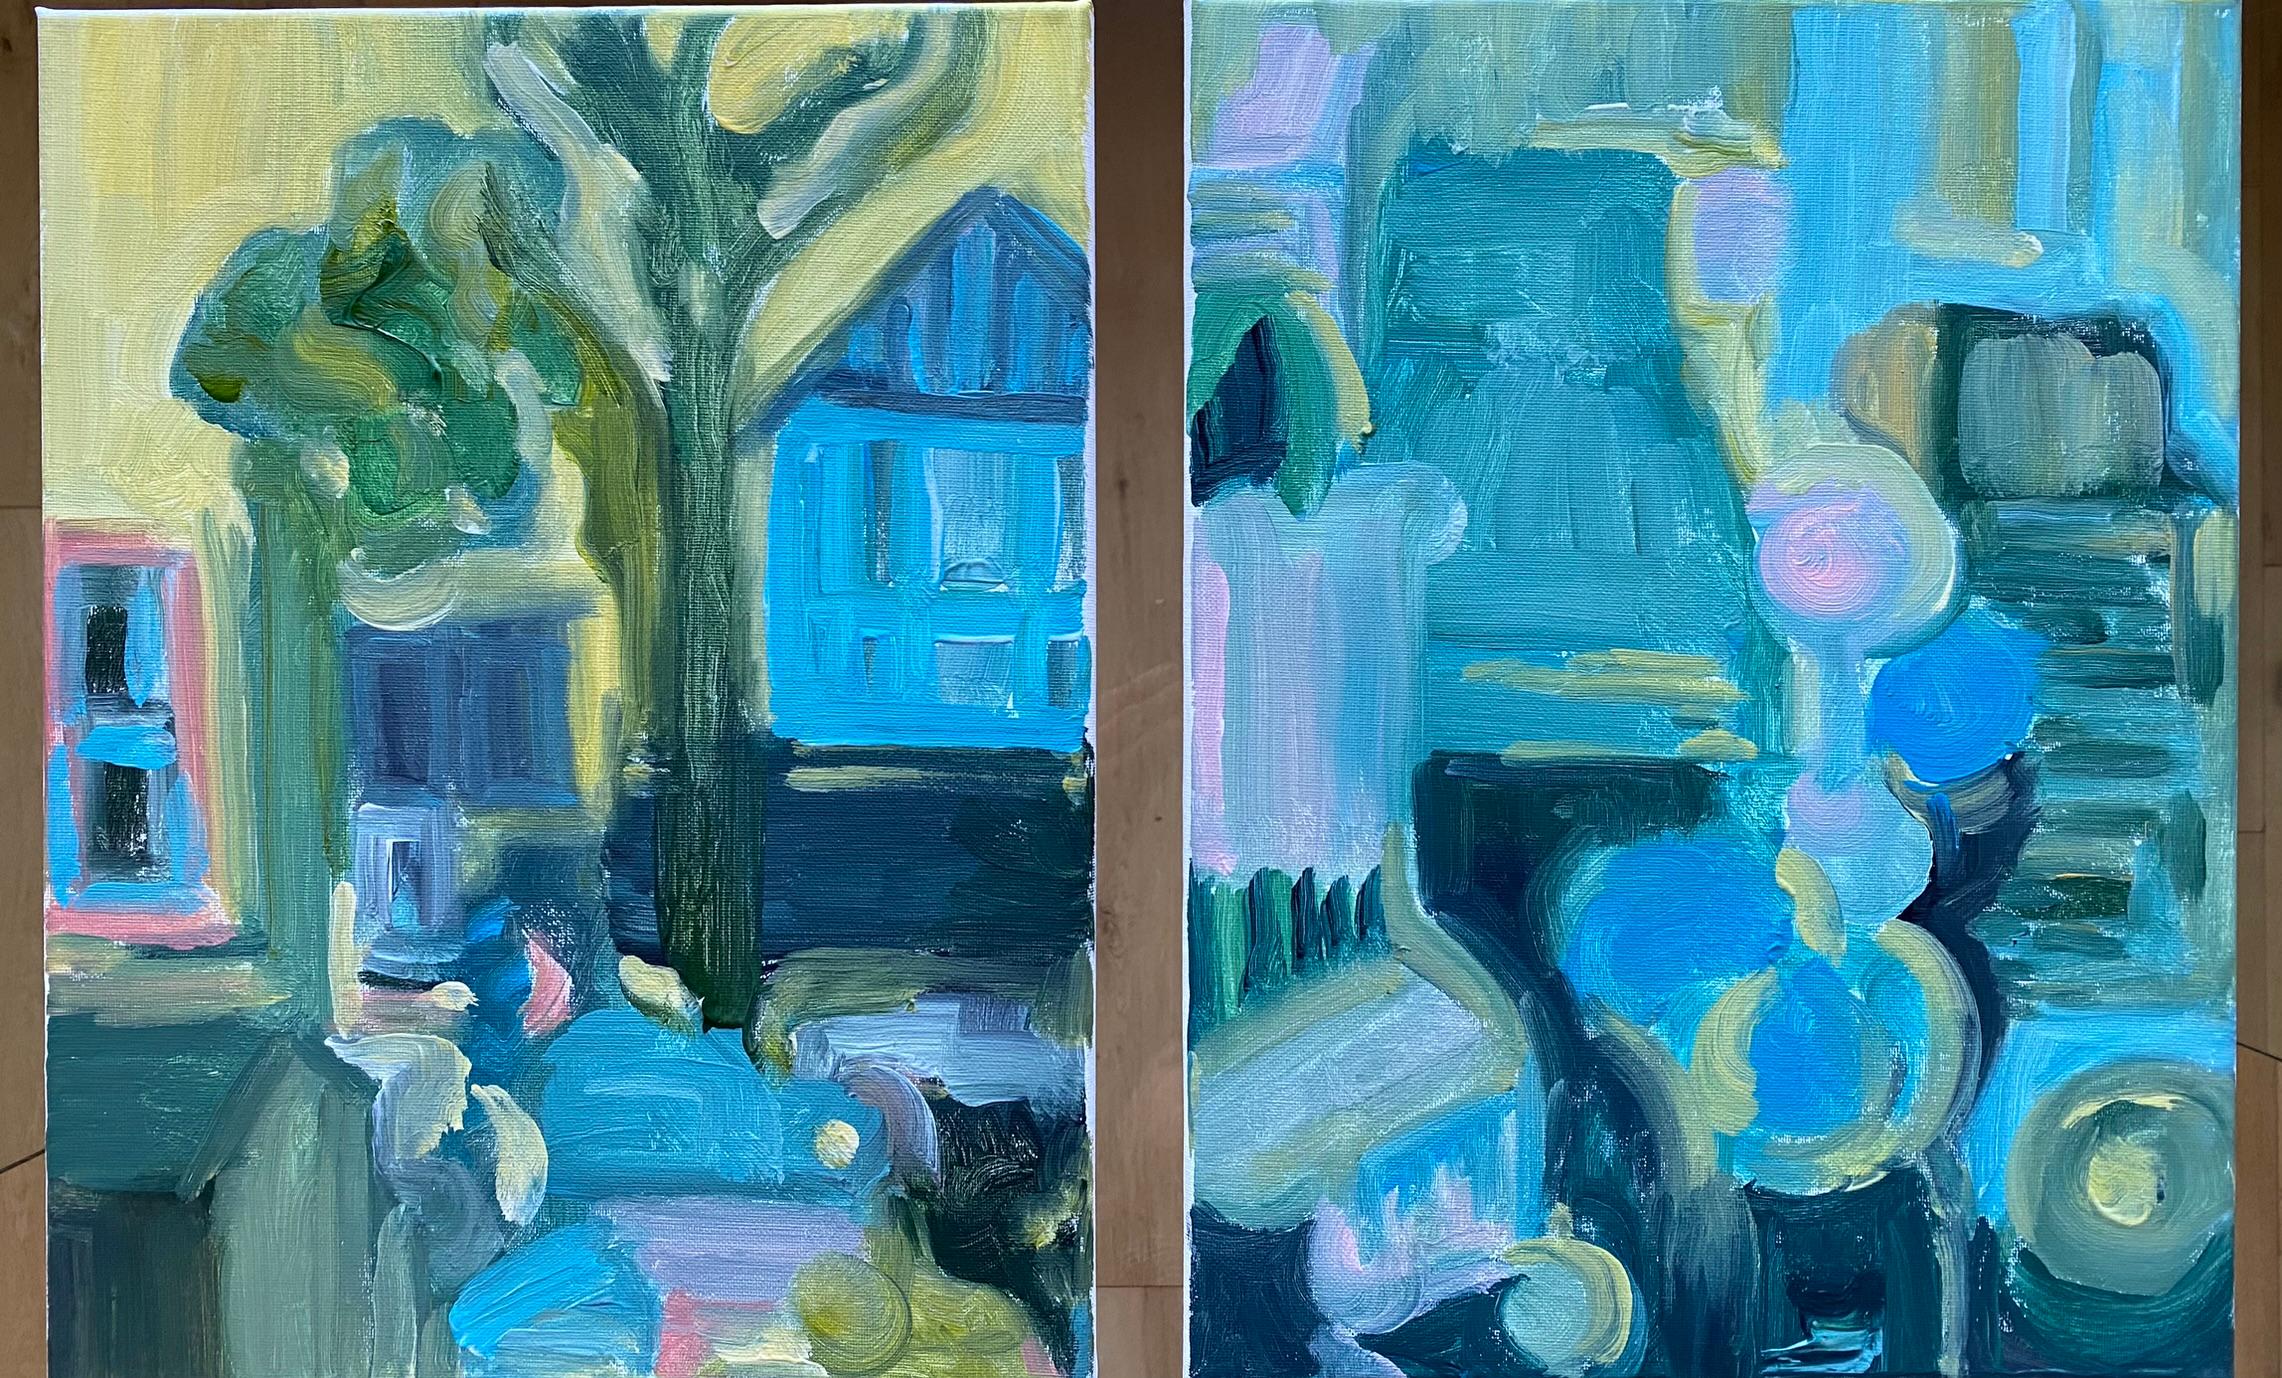 Shizico Yi's Spring Duet is a project that explores the format of sets of diptychs through a series of paintings. Shizico Yi painted en plein air, capturing the landscape outside of her studio and the interiors of the studio in its entirety,